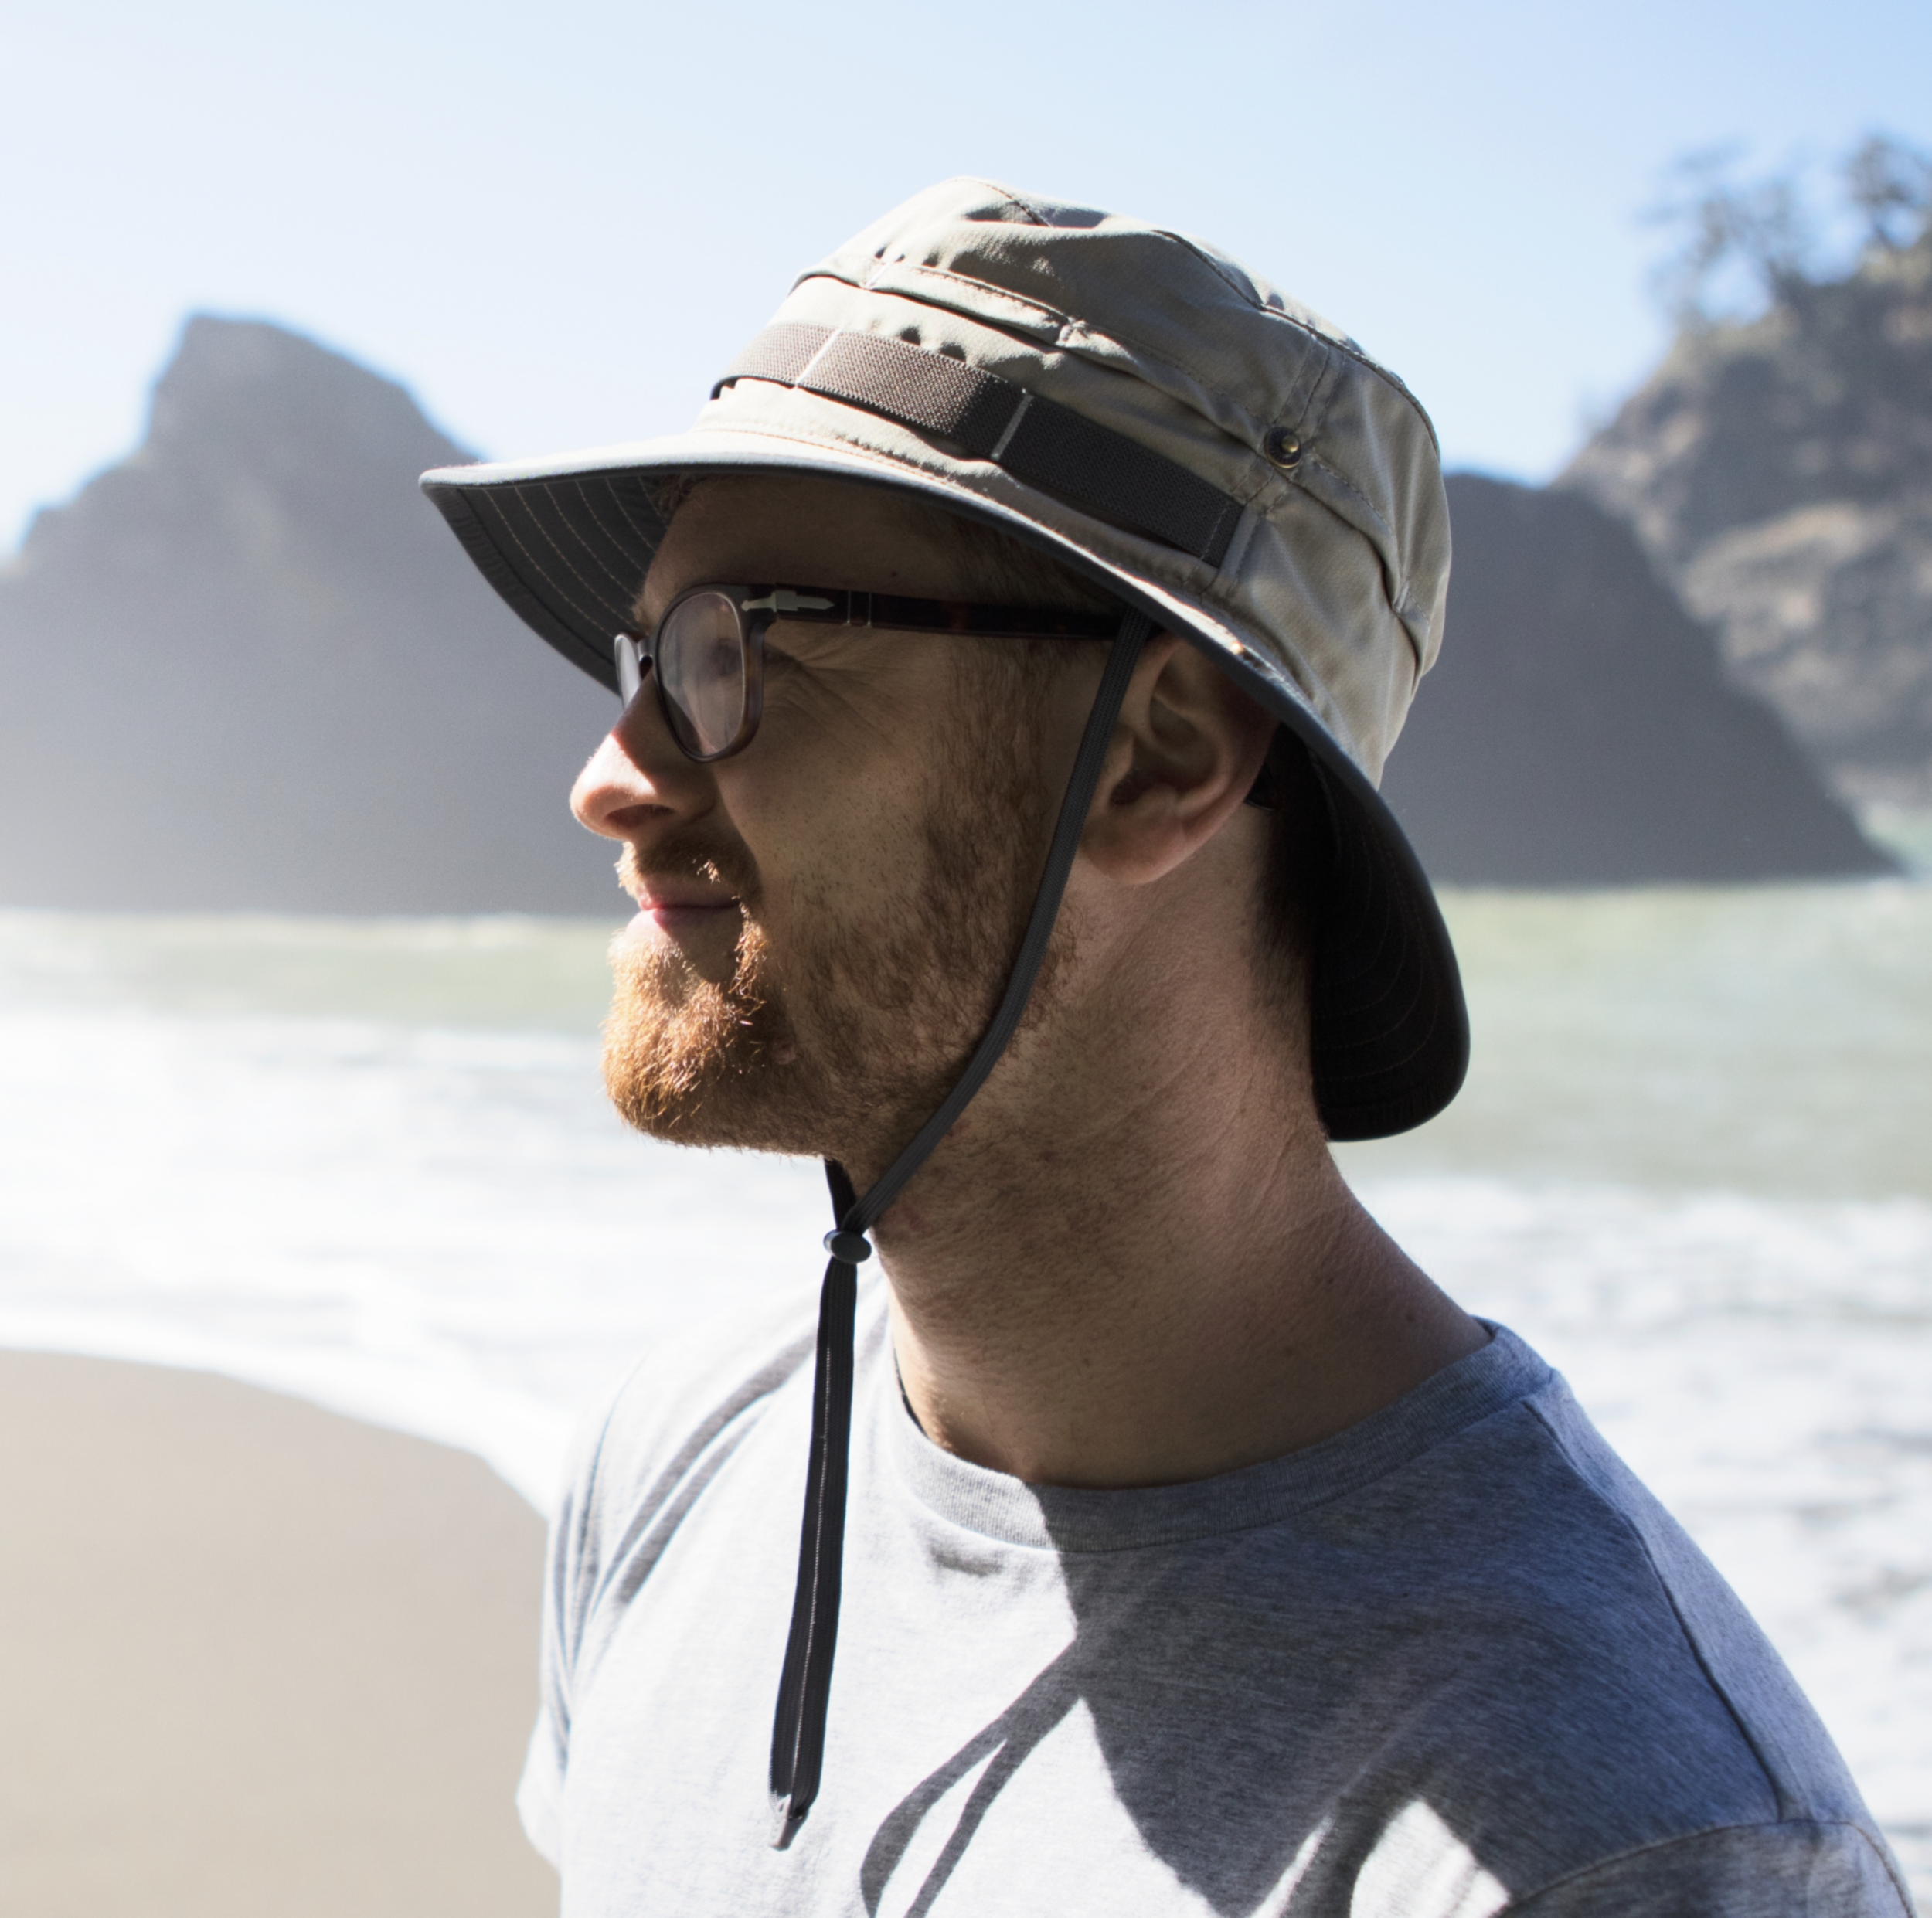 Backpacking Hats - The Most Underrated Backpacking Gear— By Land